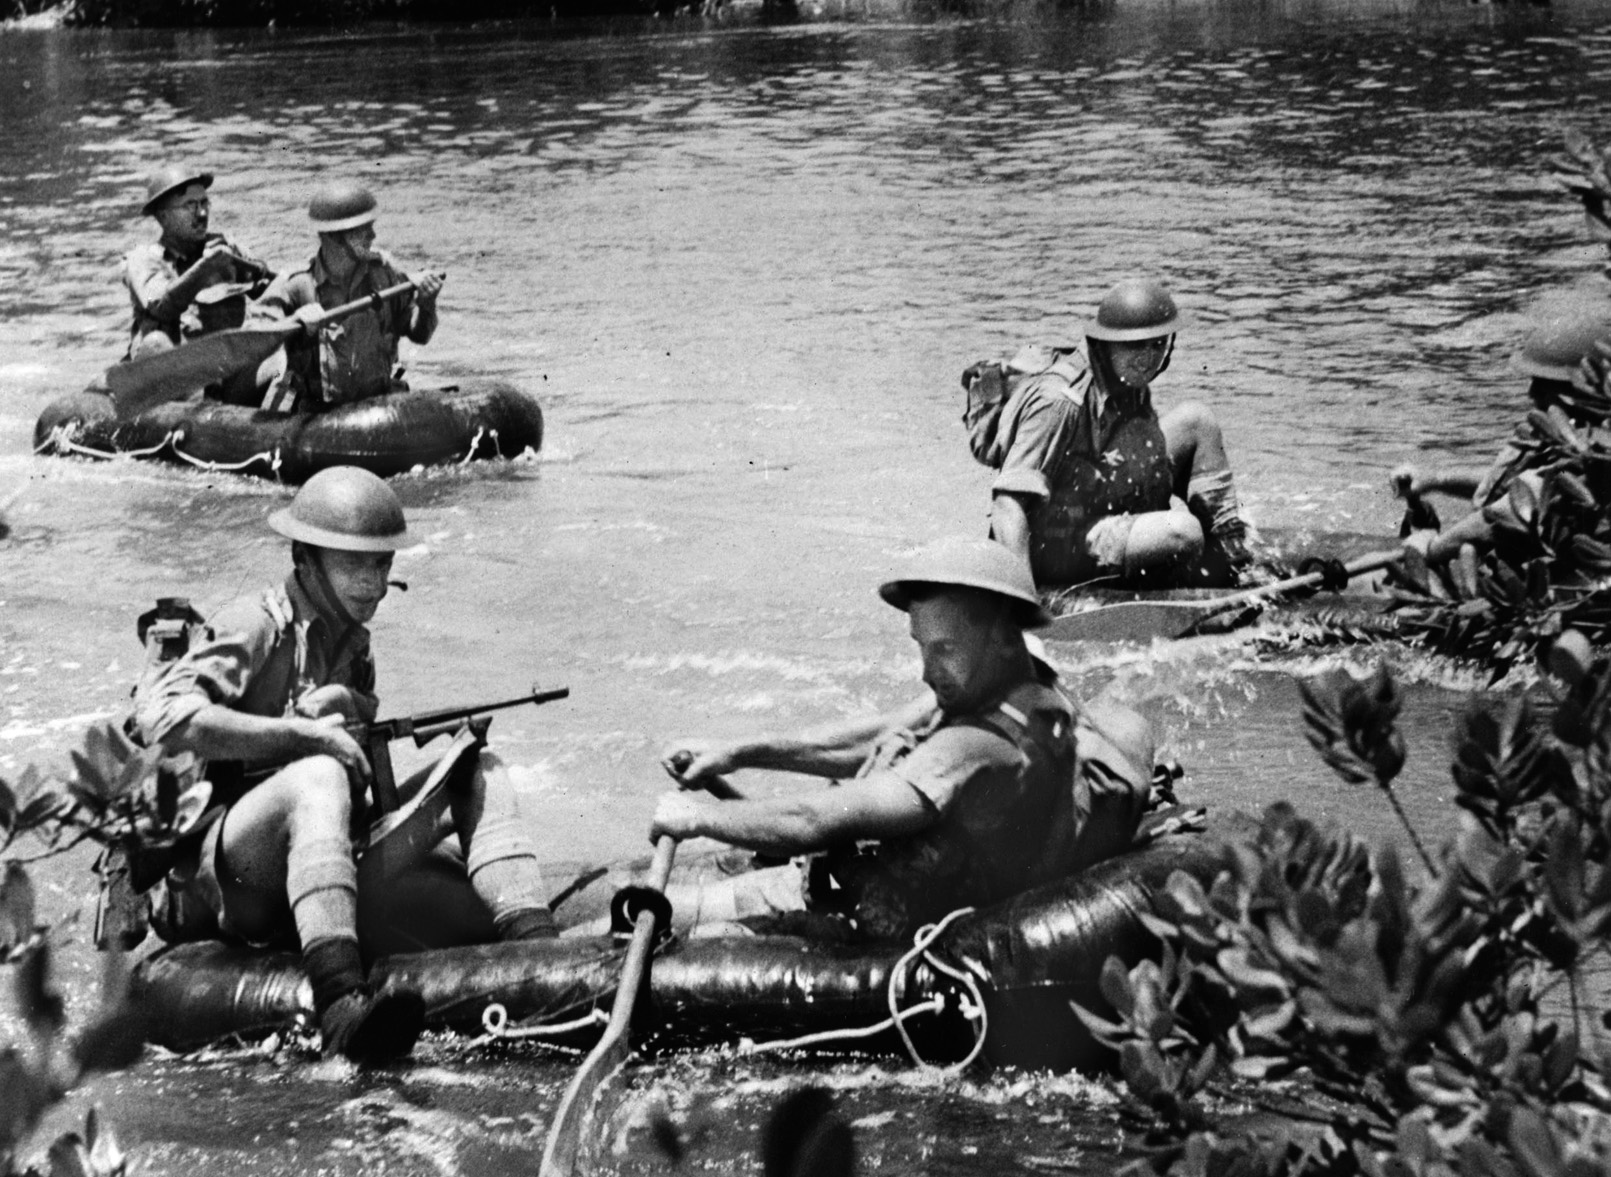 Six Australian soldiers with tommy guns cross a jungle river in rubber rafts during training. The Aussies worried that if Malaya fell, Australia probably would be invaded next.